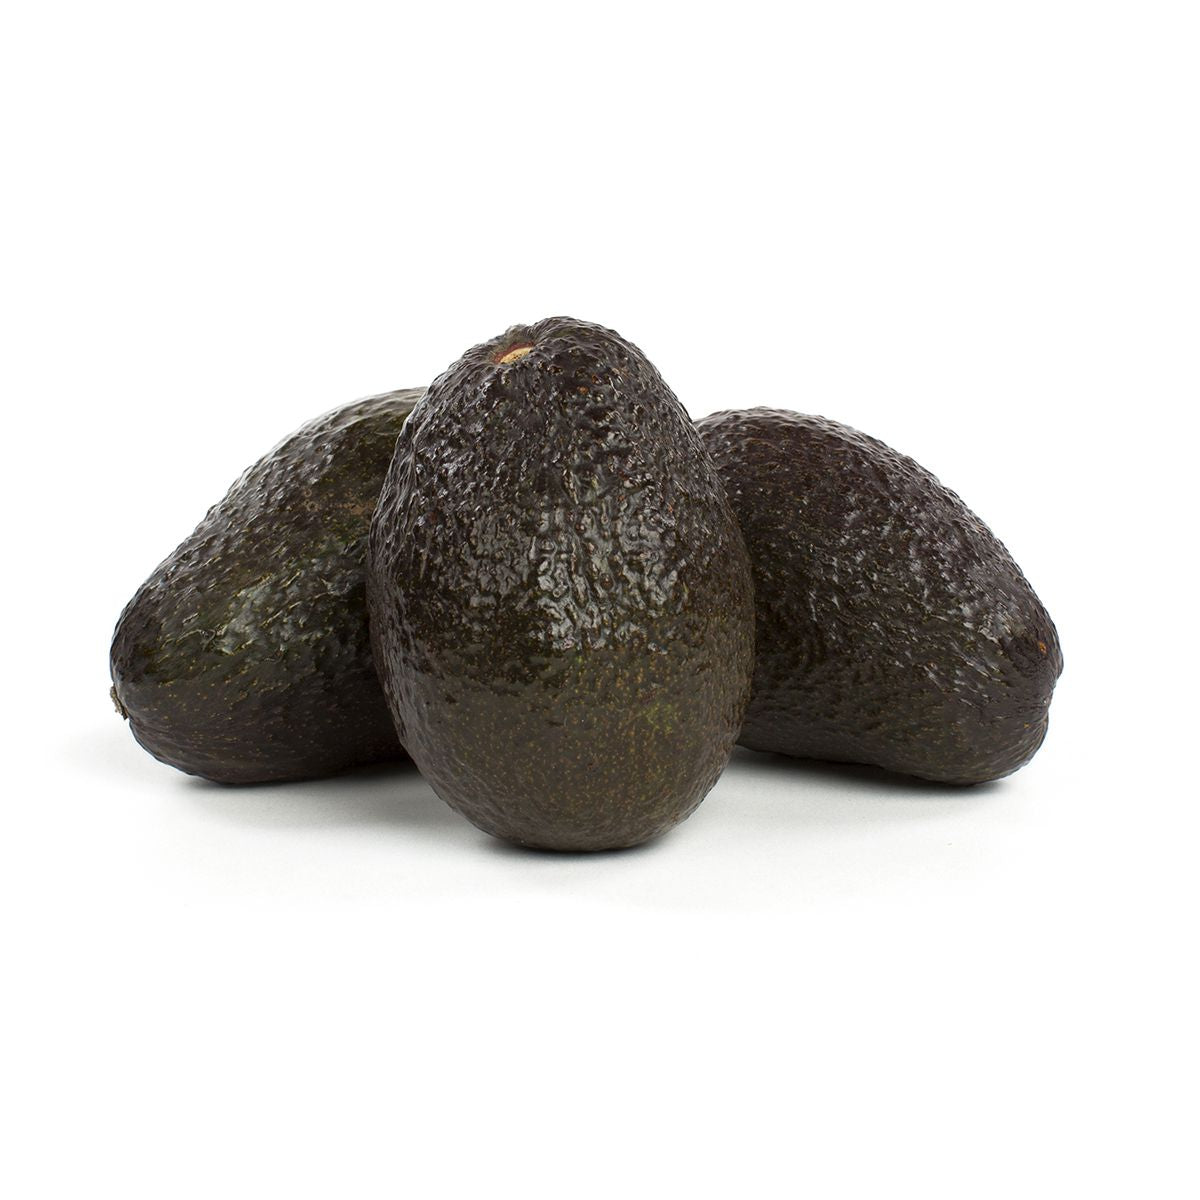 Avocados From Mexico Ripe Hass Avocados 36 Ct